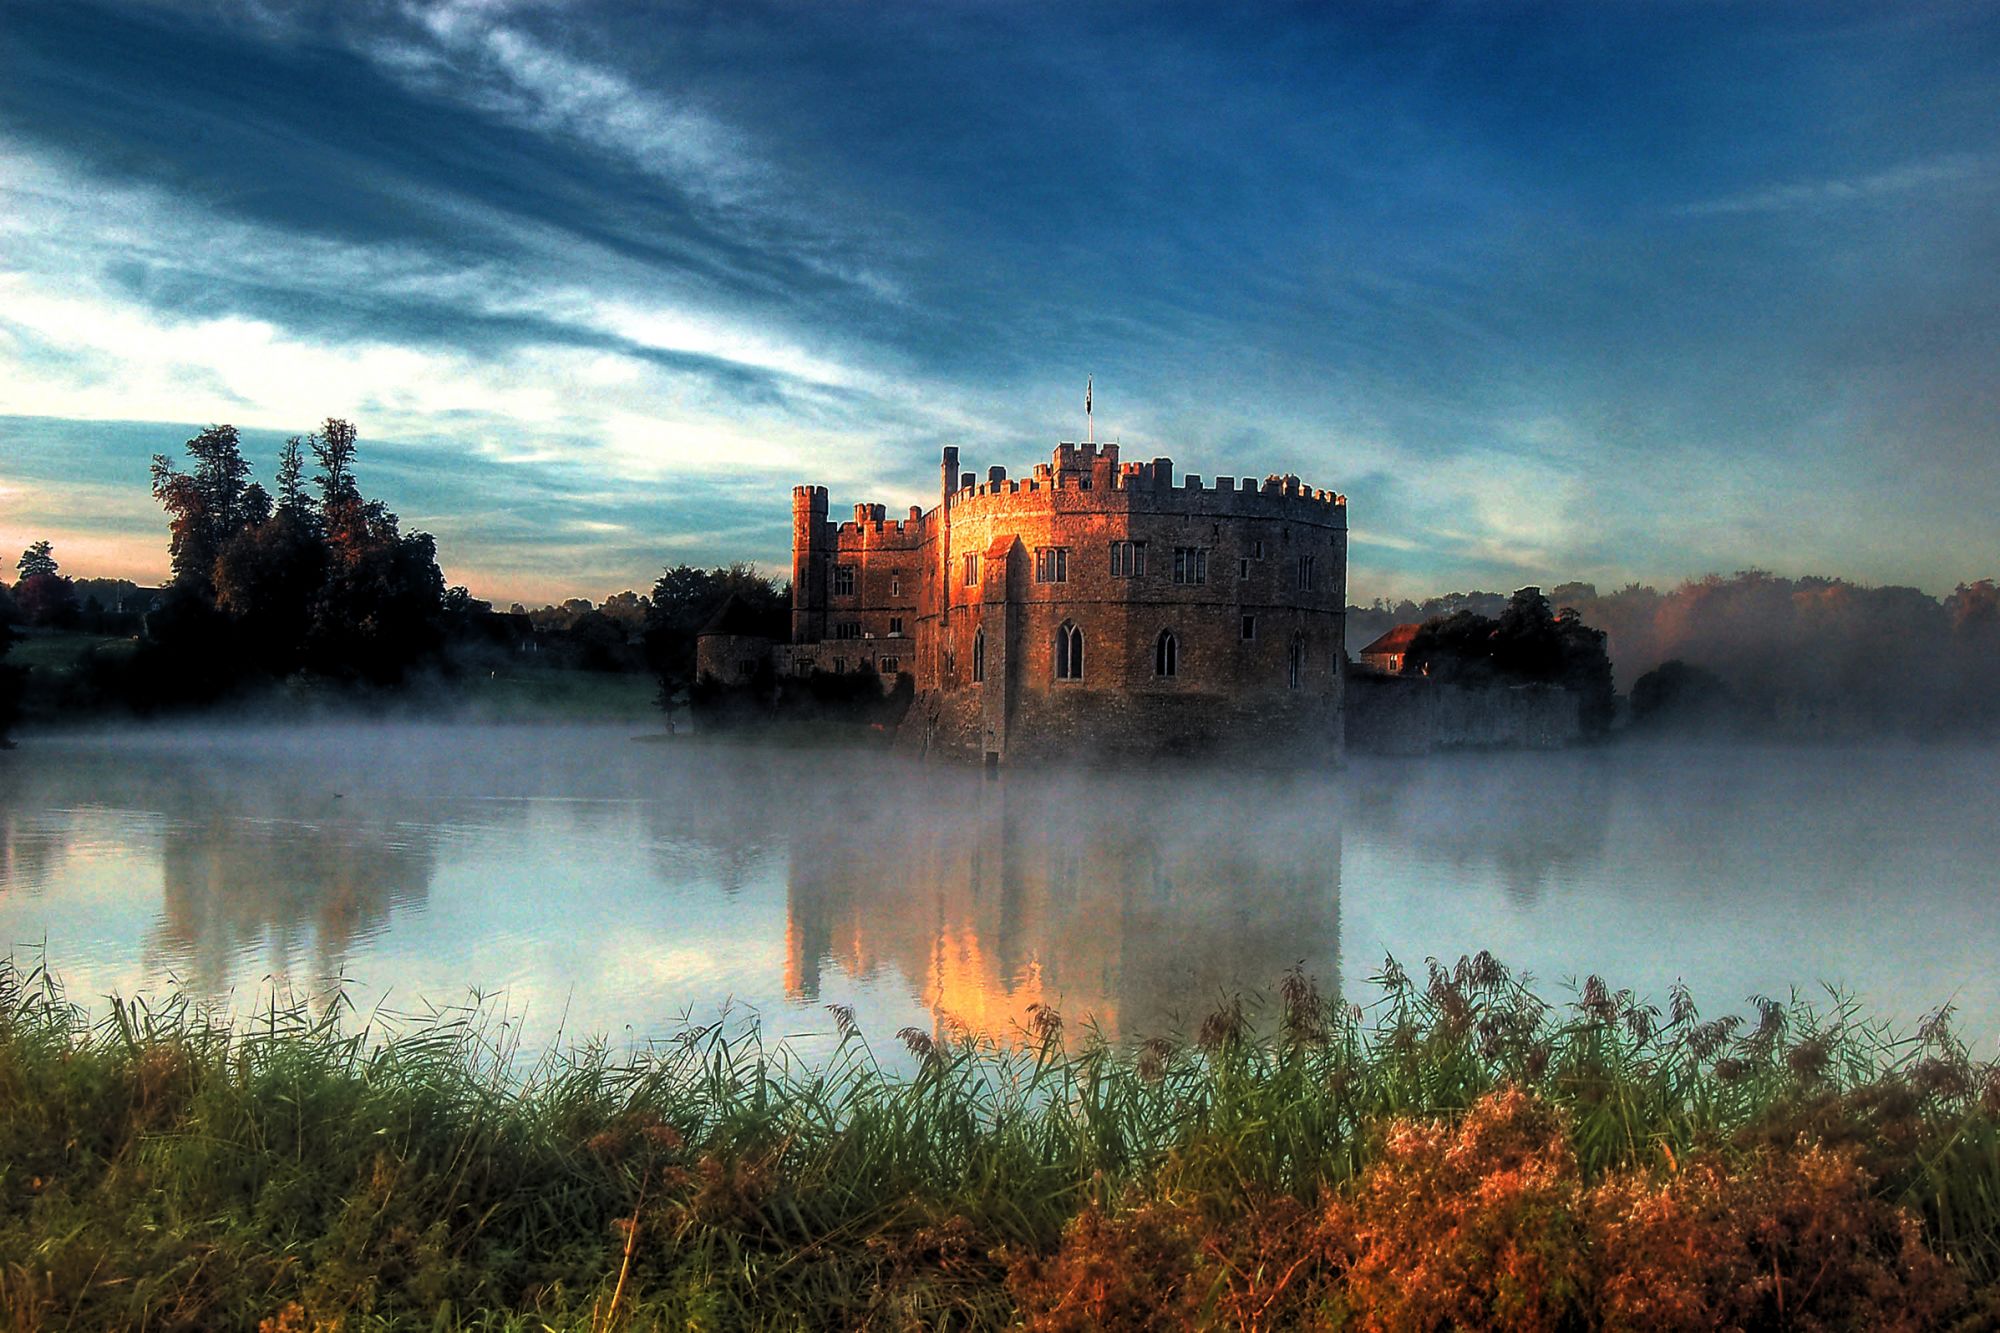 How to Think About Economic Moats When Starting a Business